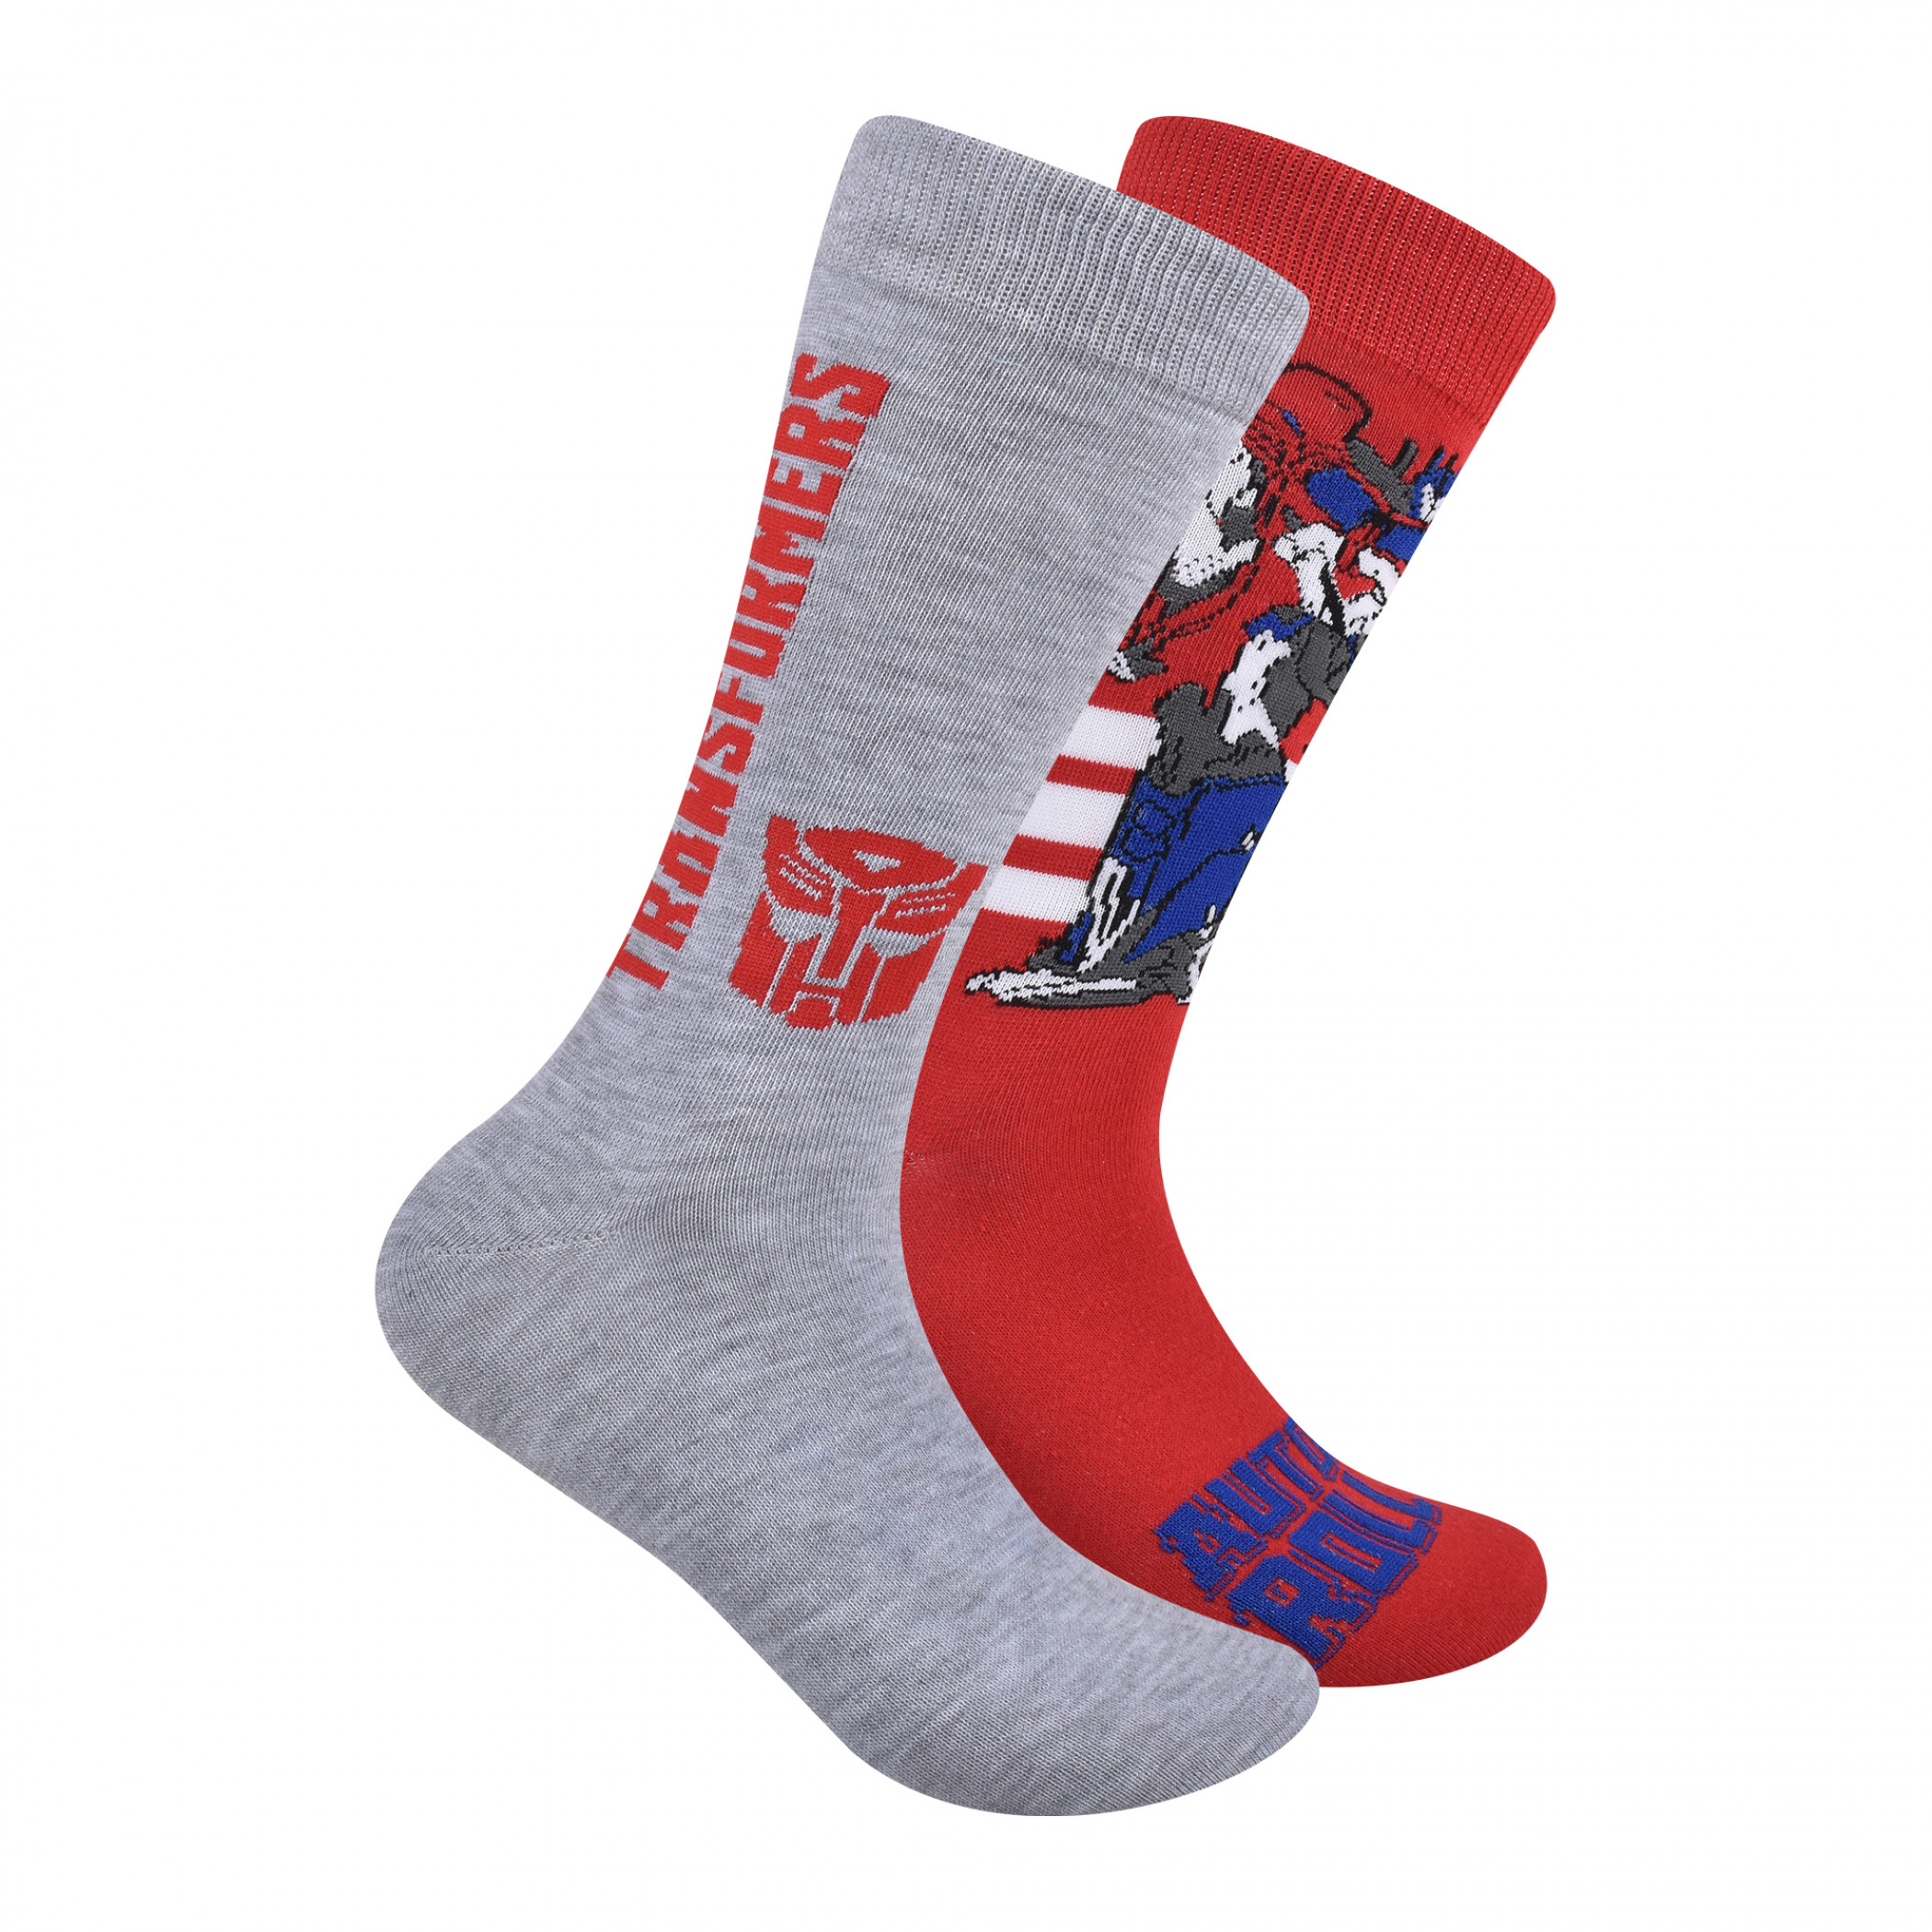 Transformers Teen Adult 5 Pack Ankle Socks M5902F 